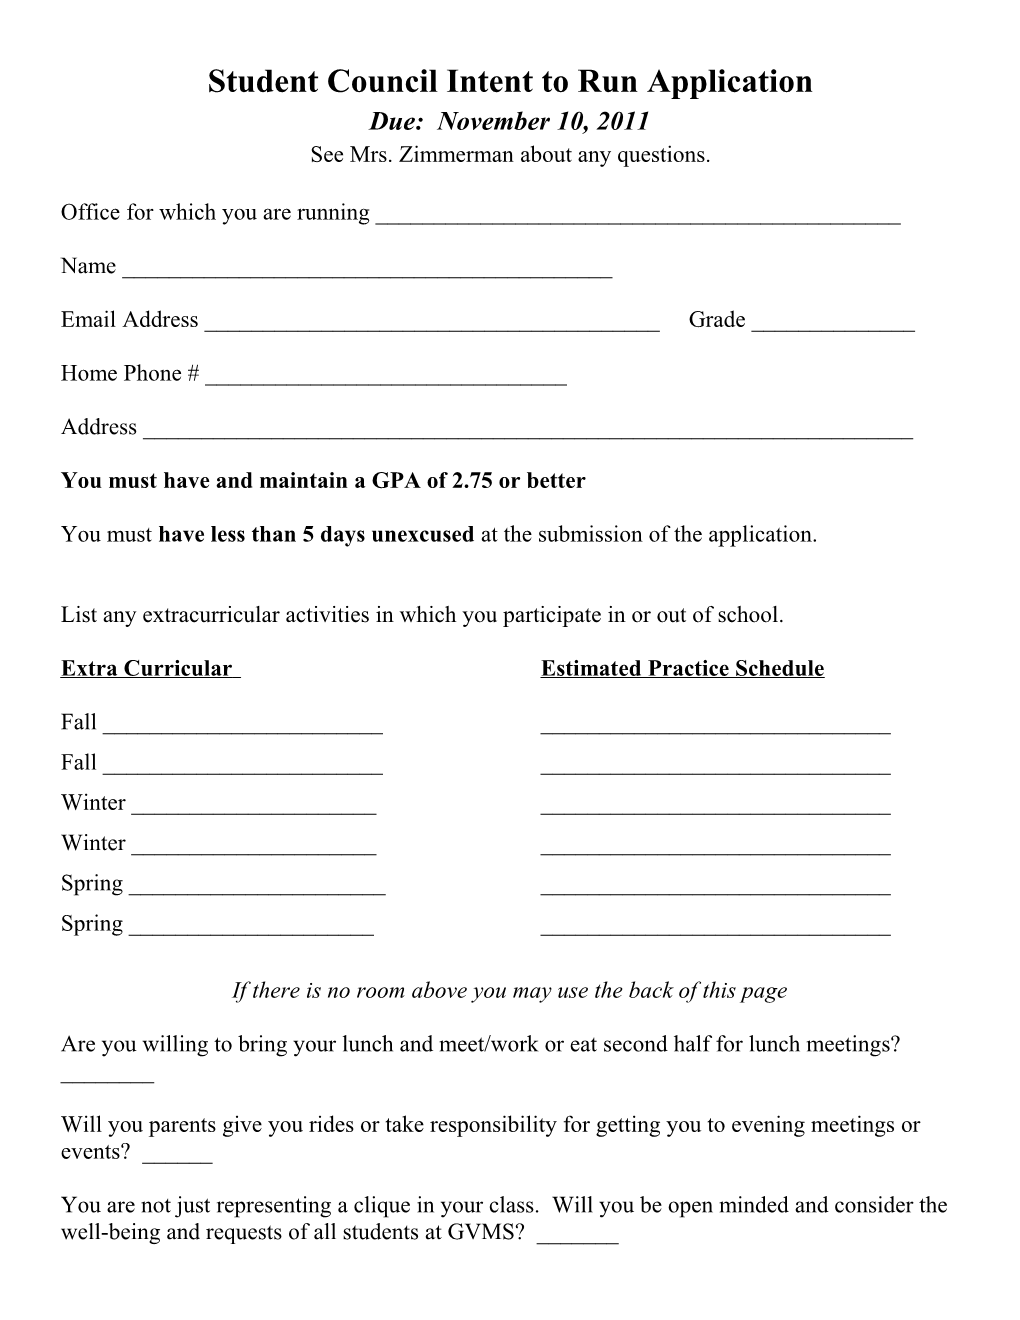 Student Council Intent to Run Application